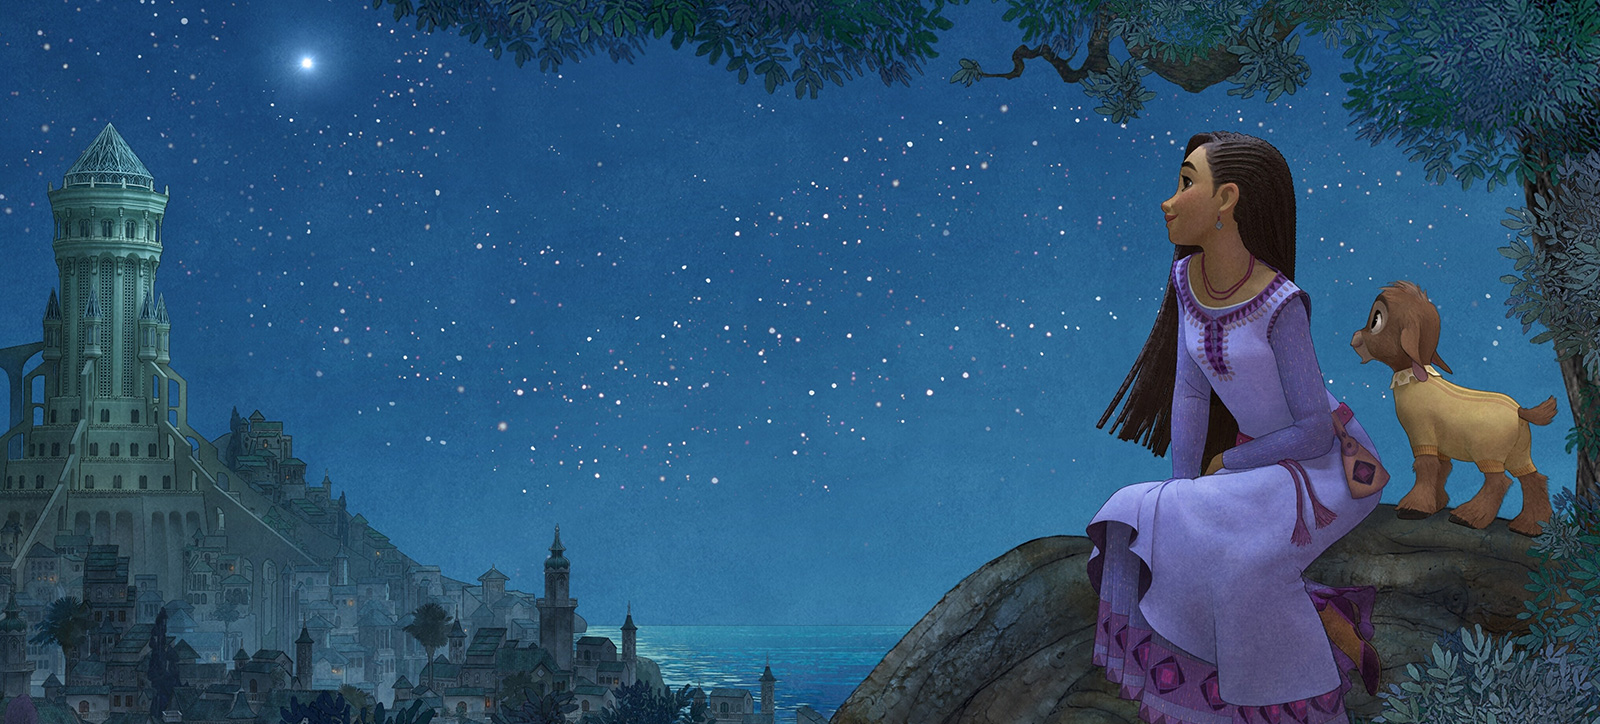 Asha, the protagonist of the new Disney animated film Wish, sits with her goat sidekick overlooking a Disney castle